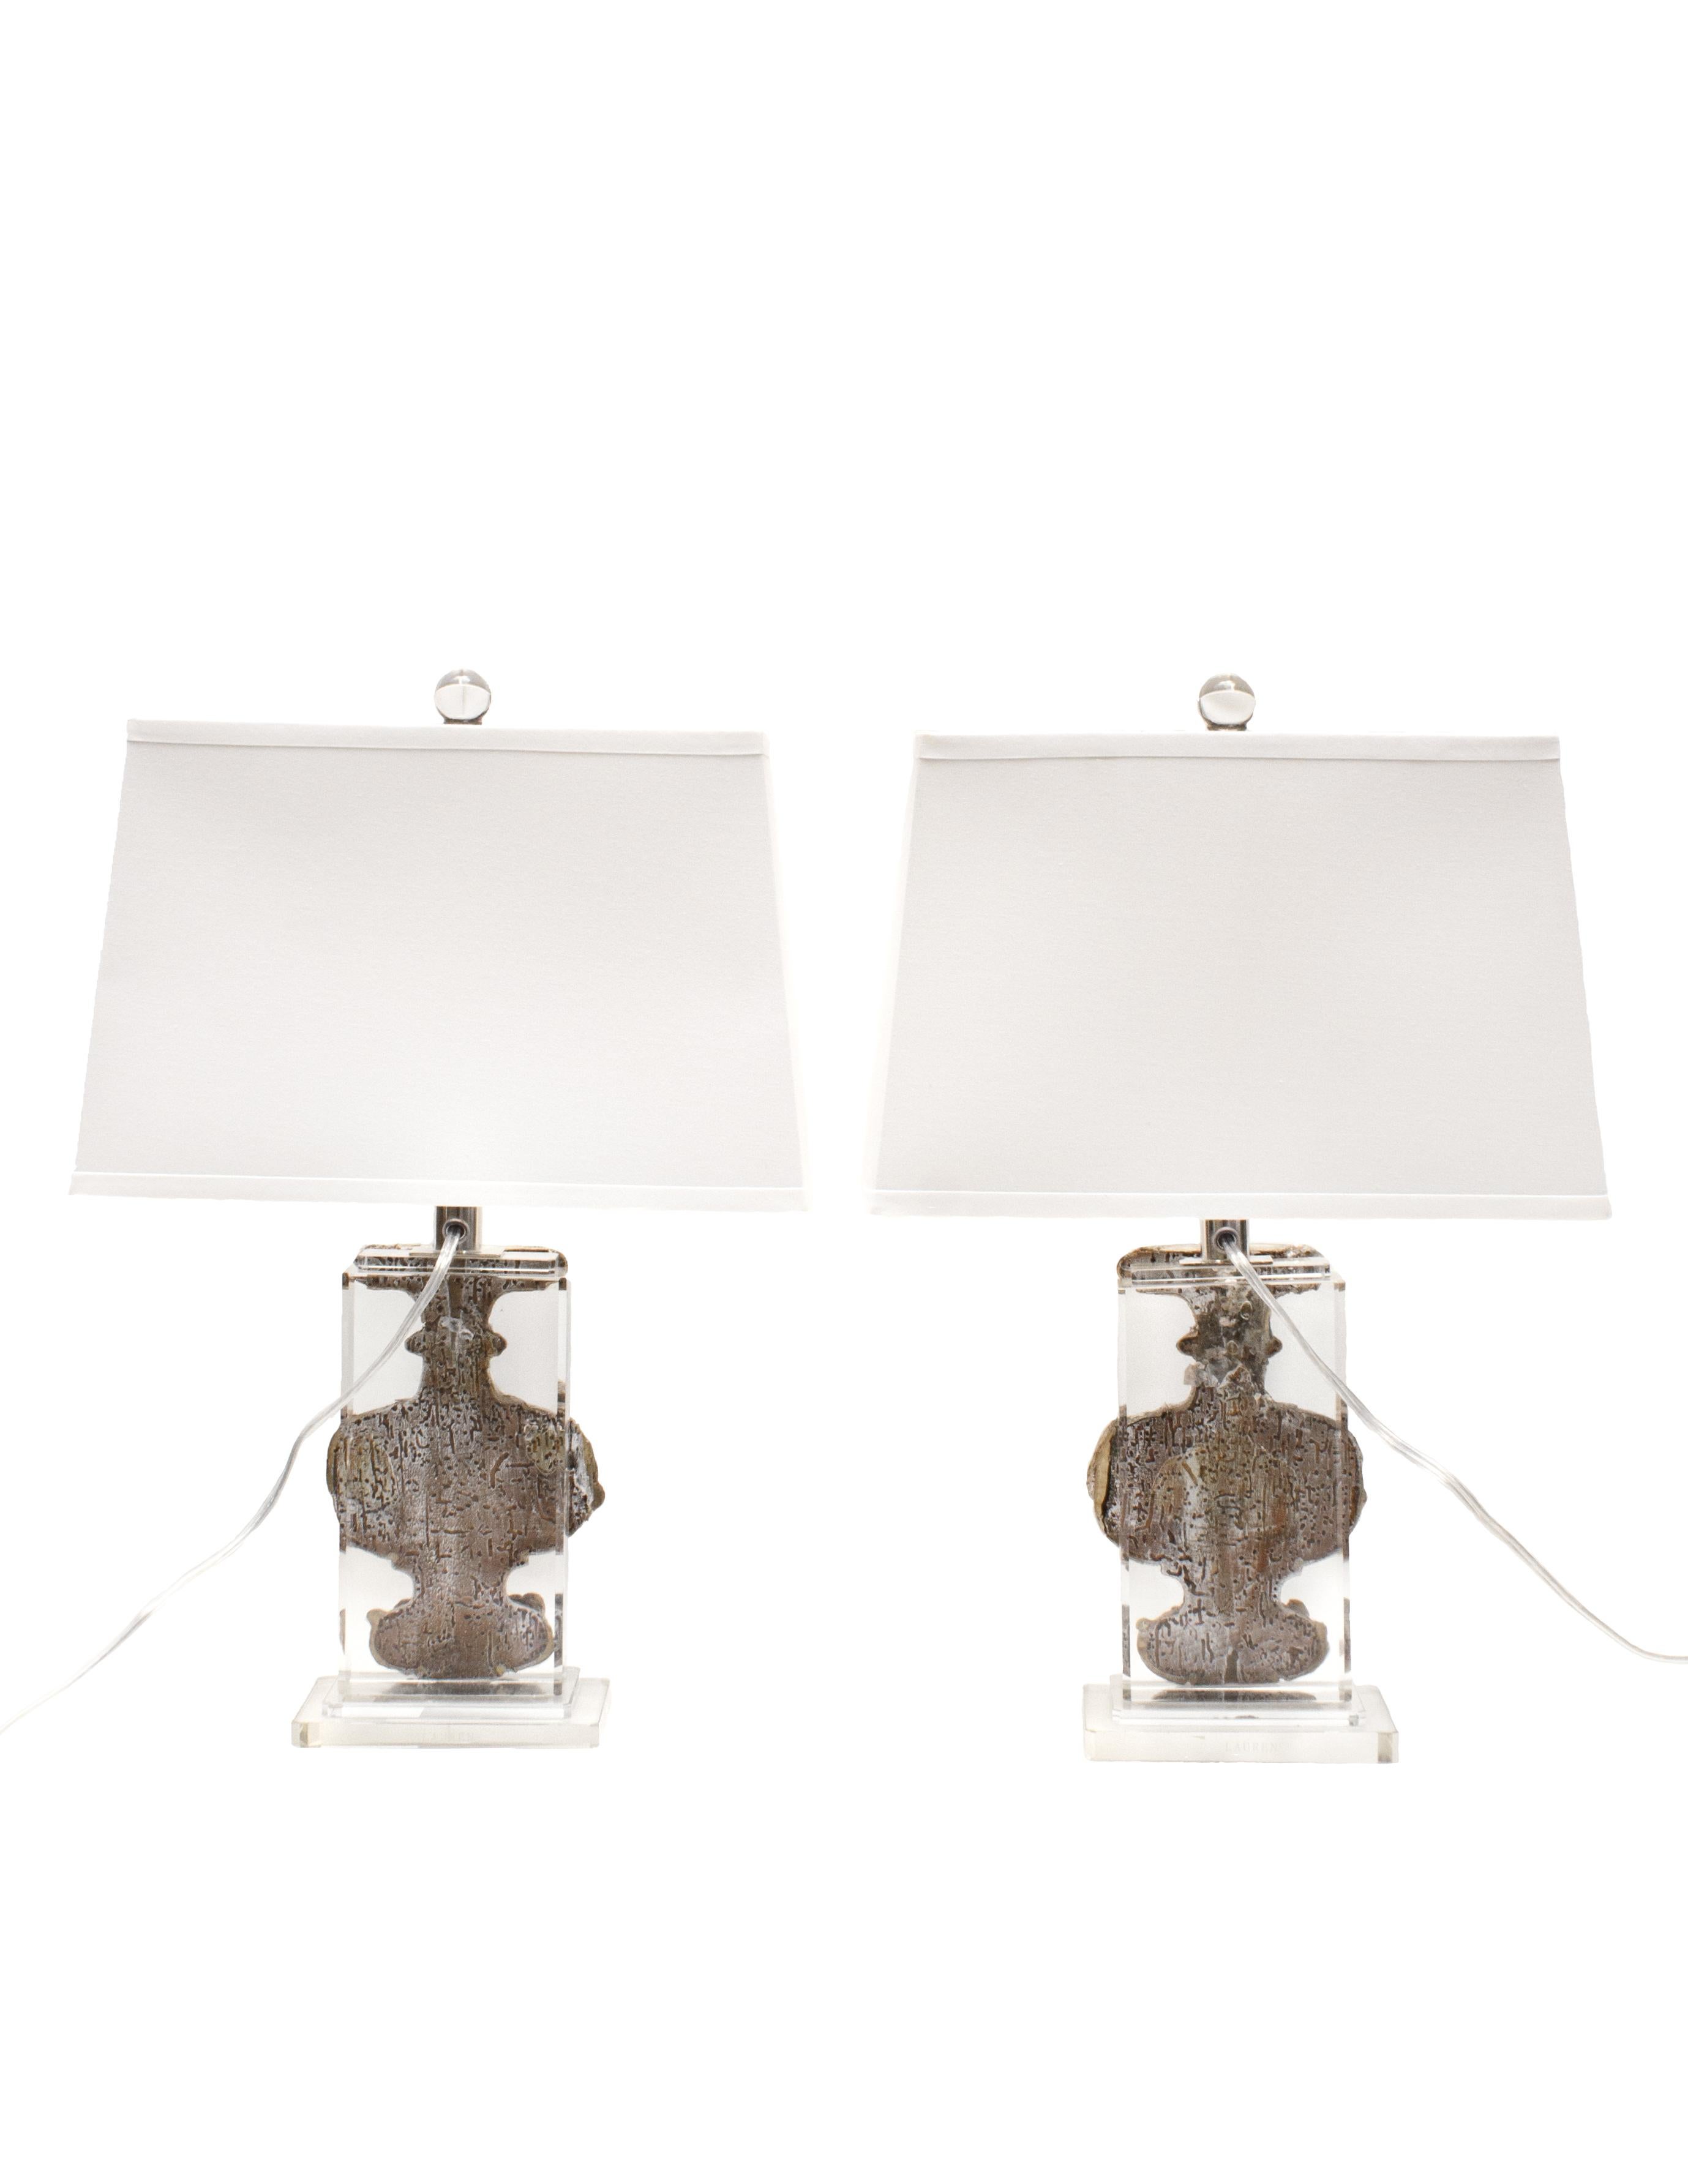 Pair of 18th century Italian silver leaf fragment vases applied to Lucite lamp bases. 

The 18th century artifacts vases originally came from a church in Liguria, Italy. They are silver-leafed with hand carved details of angels. The artifacts have